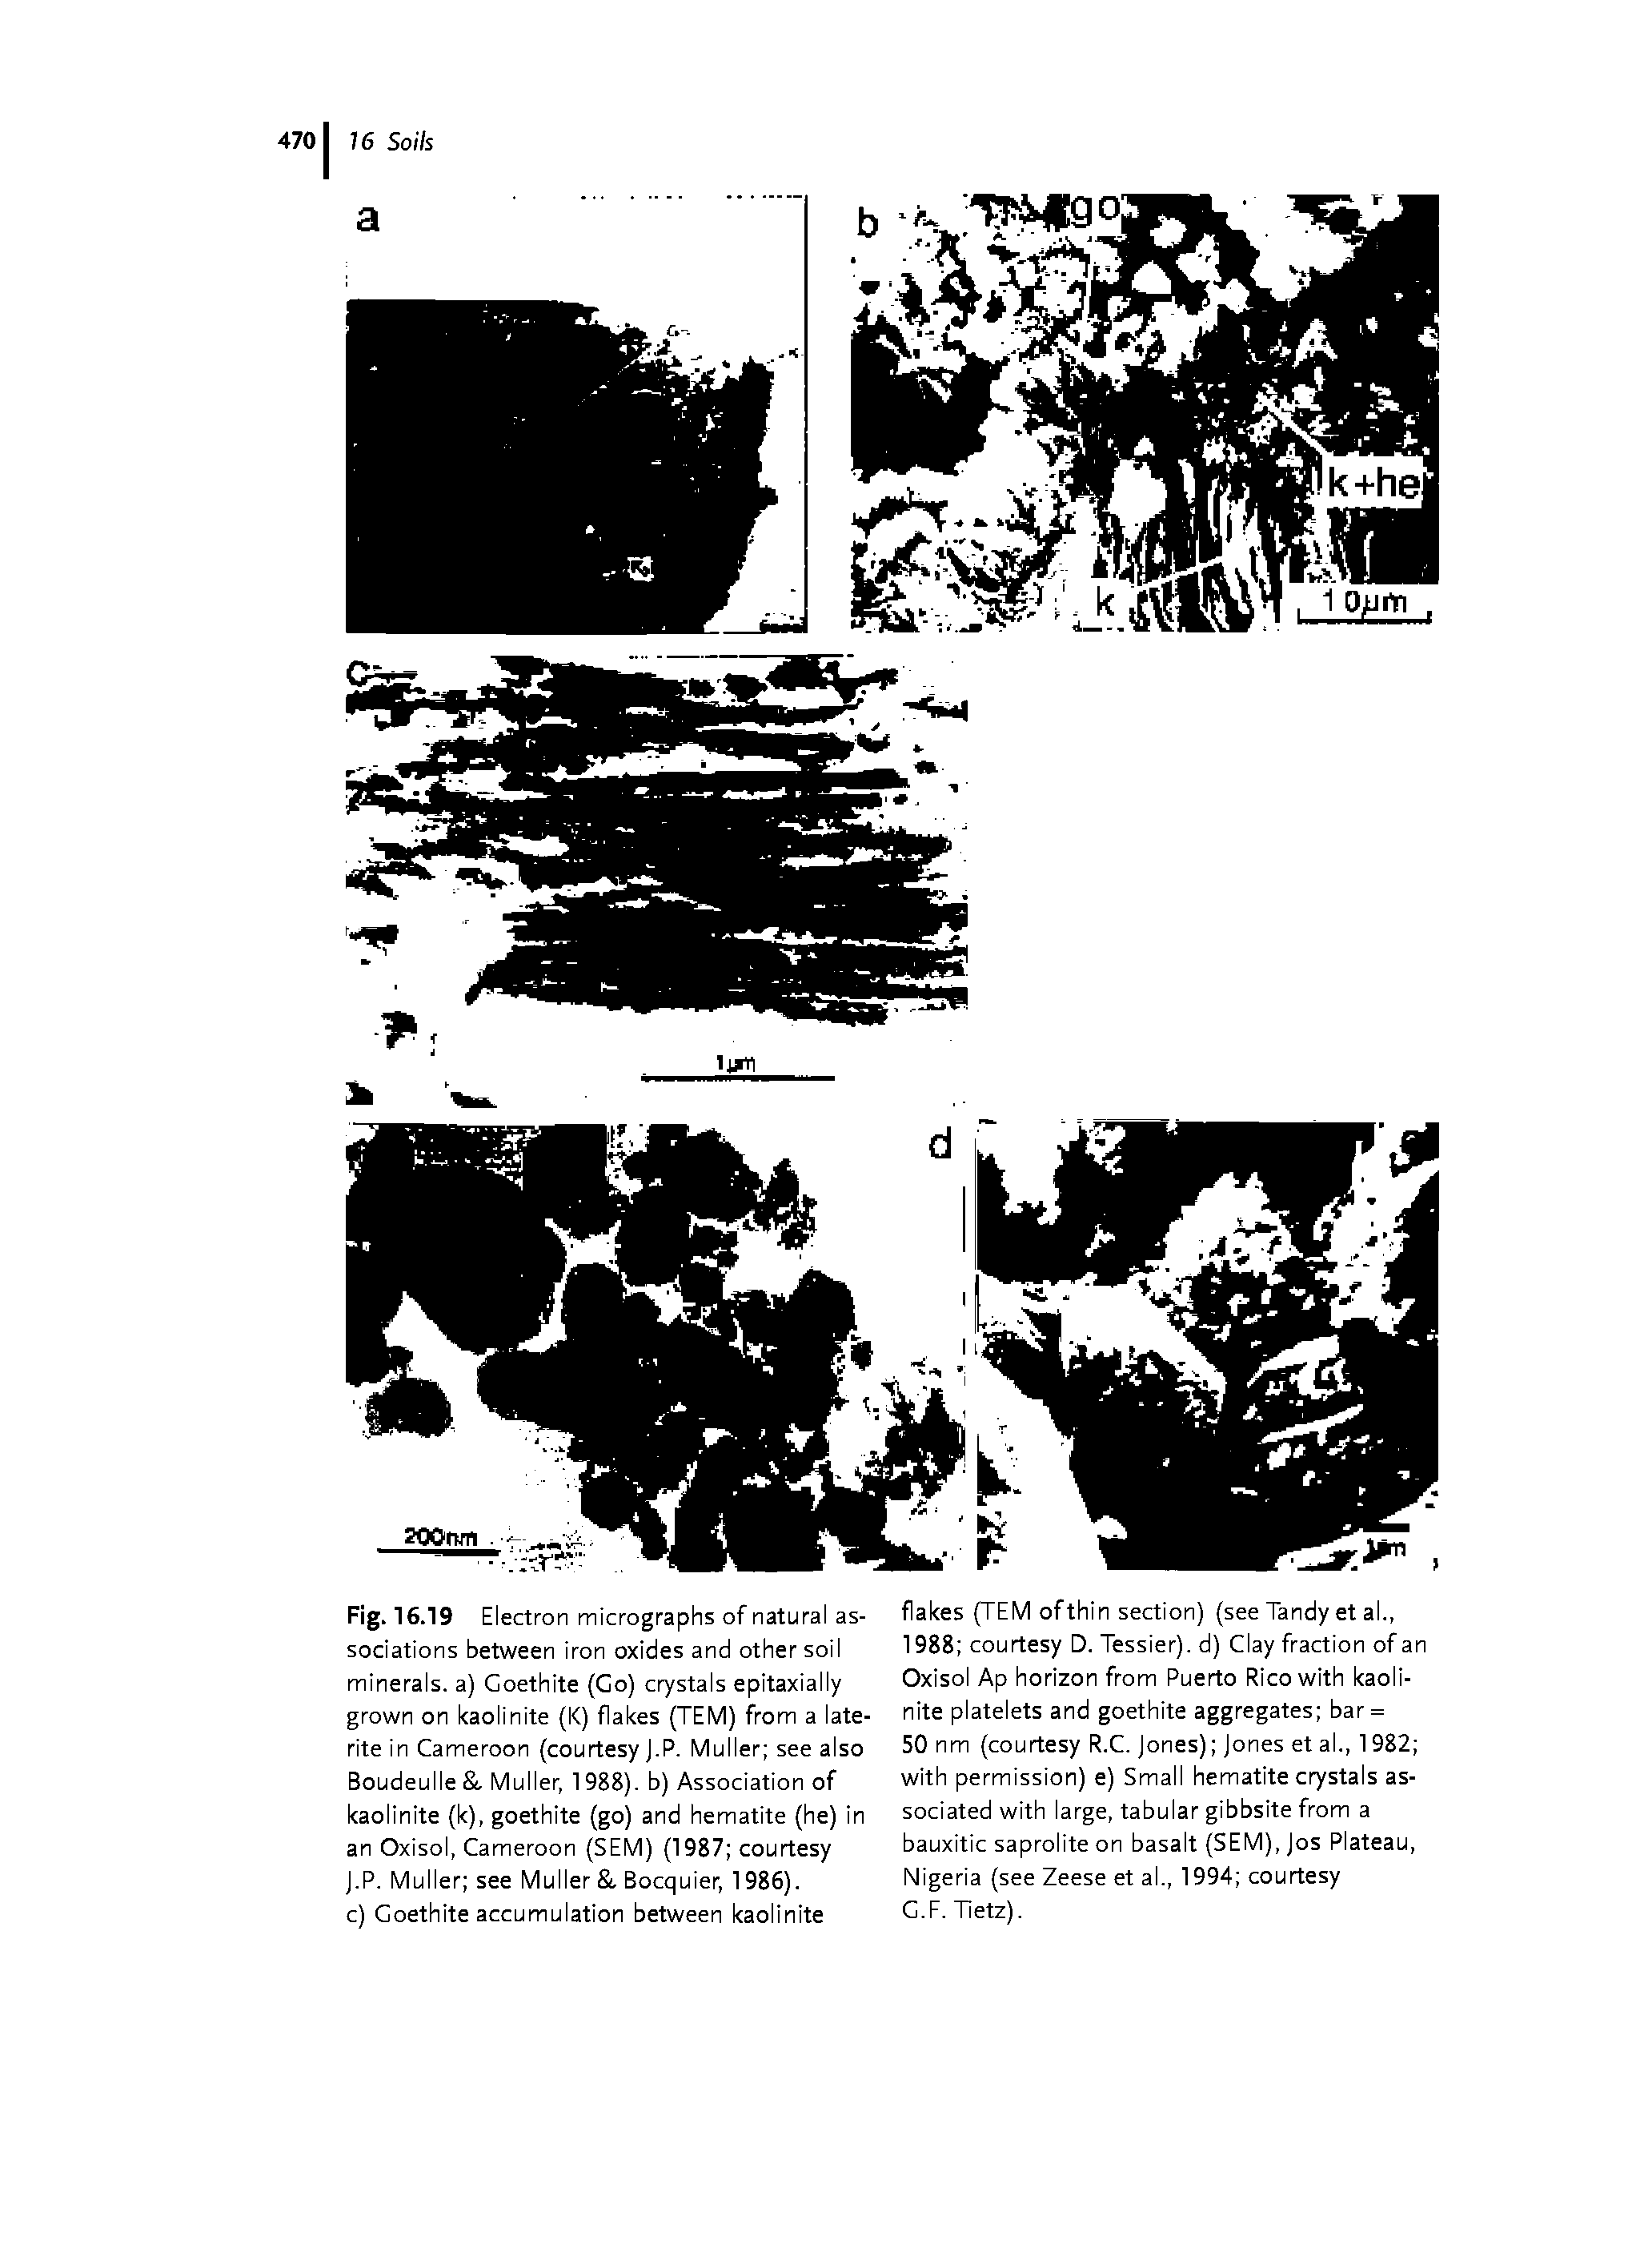 Fig. 16.19 Electron micrographs of natural associations between iron oxides and other soil minerals, a) Goethite (Co) crystals epitaxially grown on kaolinite (K) flakes (TEM) from a late-rite in Cameroon (courtesy J.P. Muller see also Boudeulle, Muller, 1988). b) Association of kaolinite (k), goethite (go) and hematite (he) in an Oxisol, Cameroon (SEM) (1987 courtesy J.P. Muller see Muller, Bocquier, 1986). c) Goethite accumulation between kaolinite...